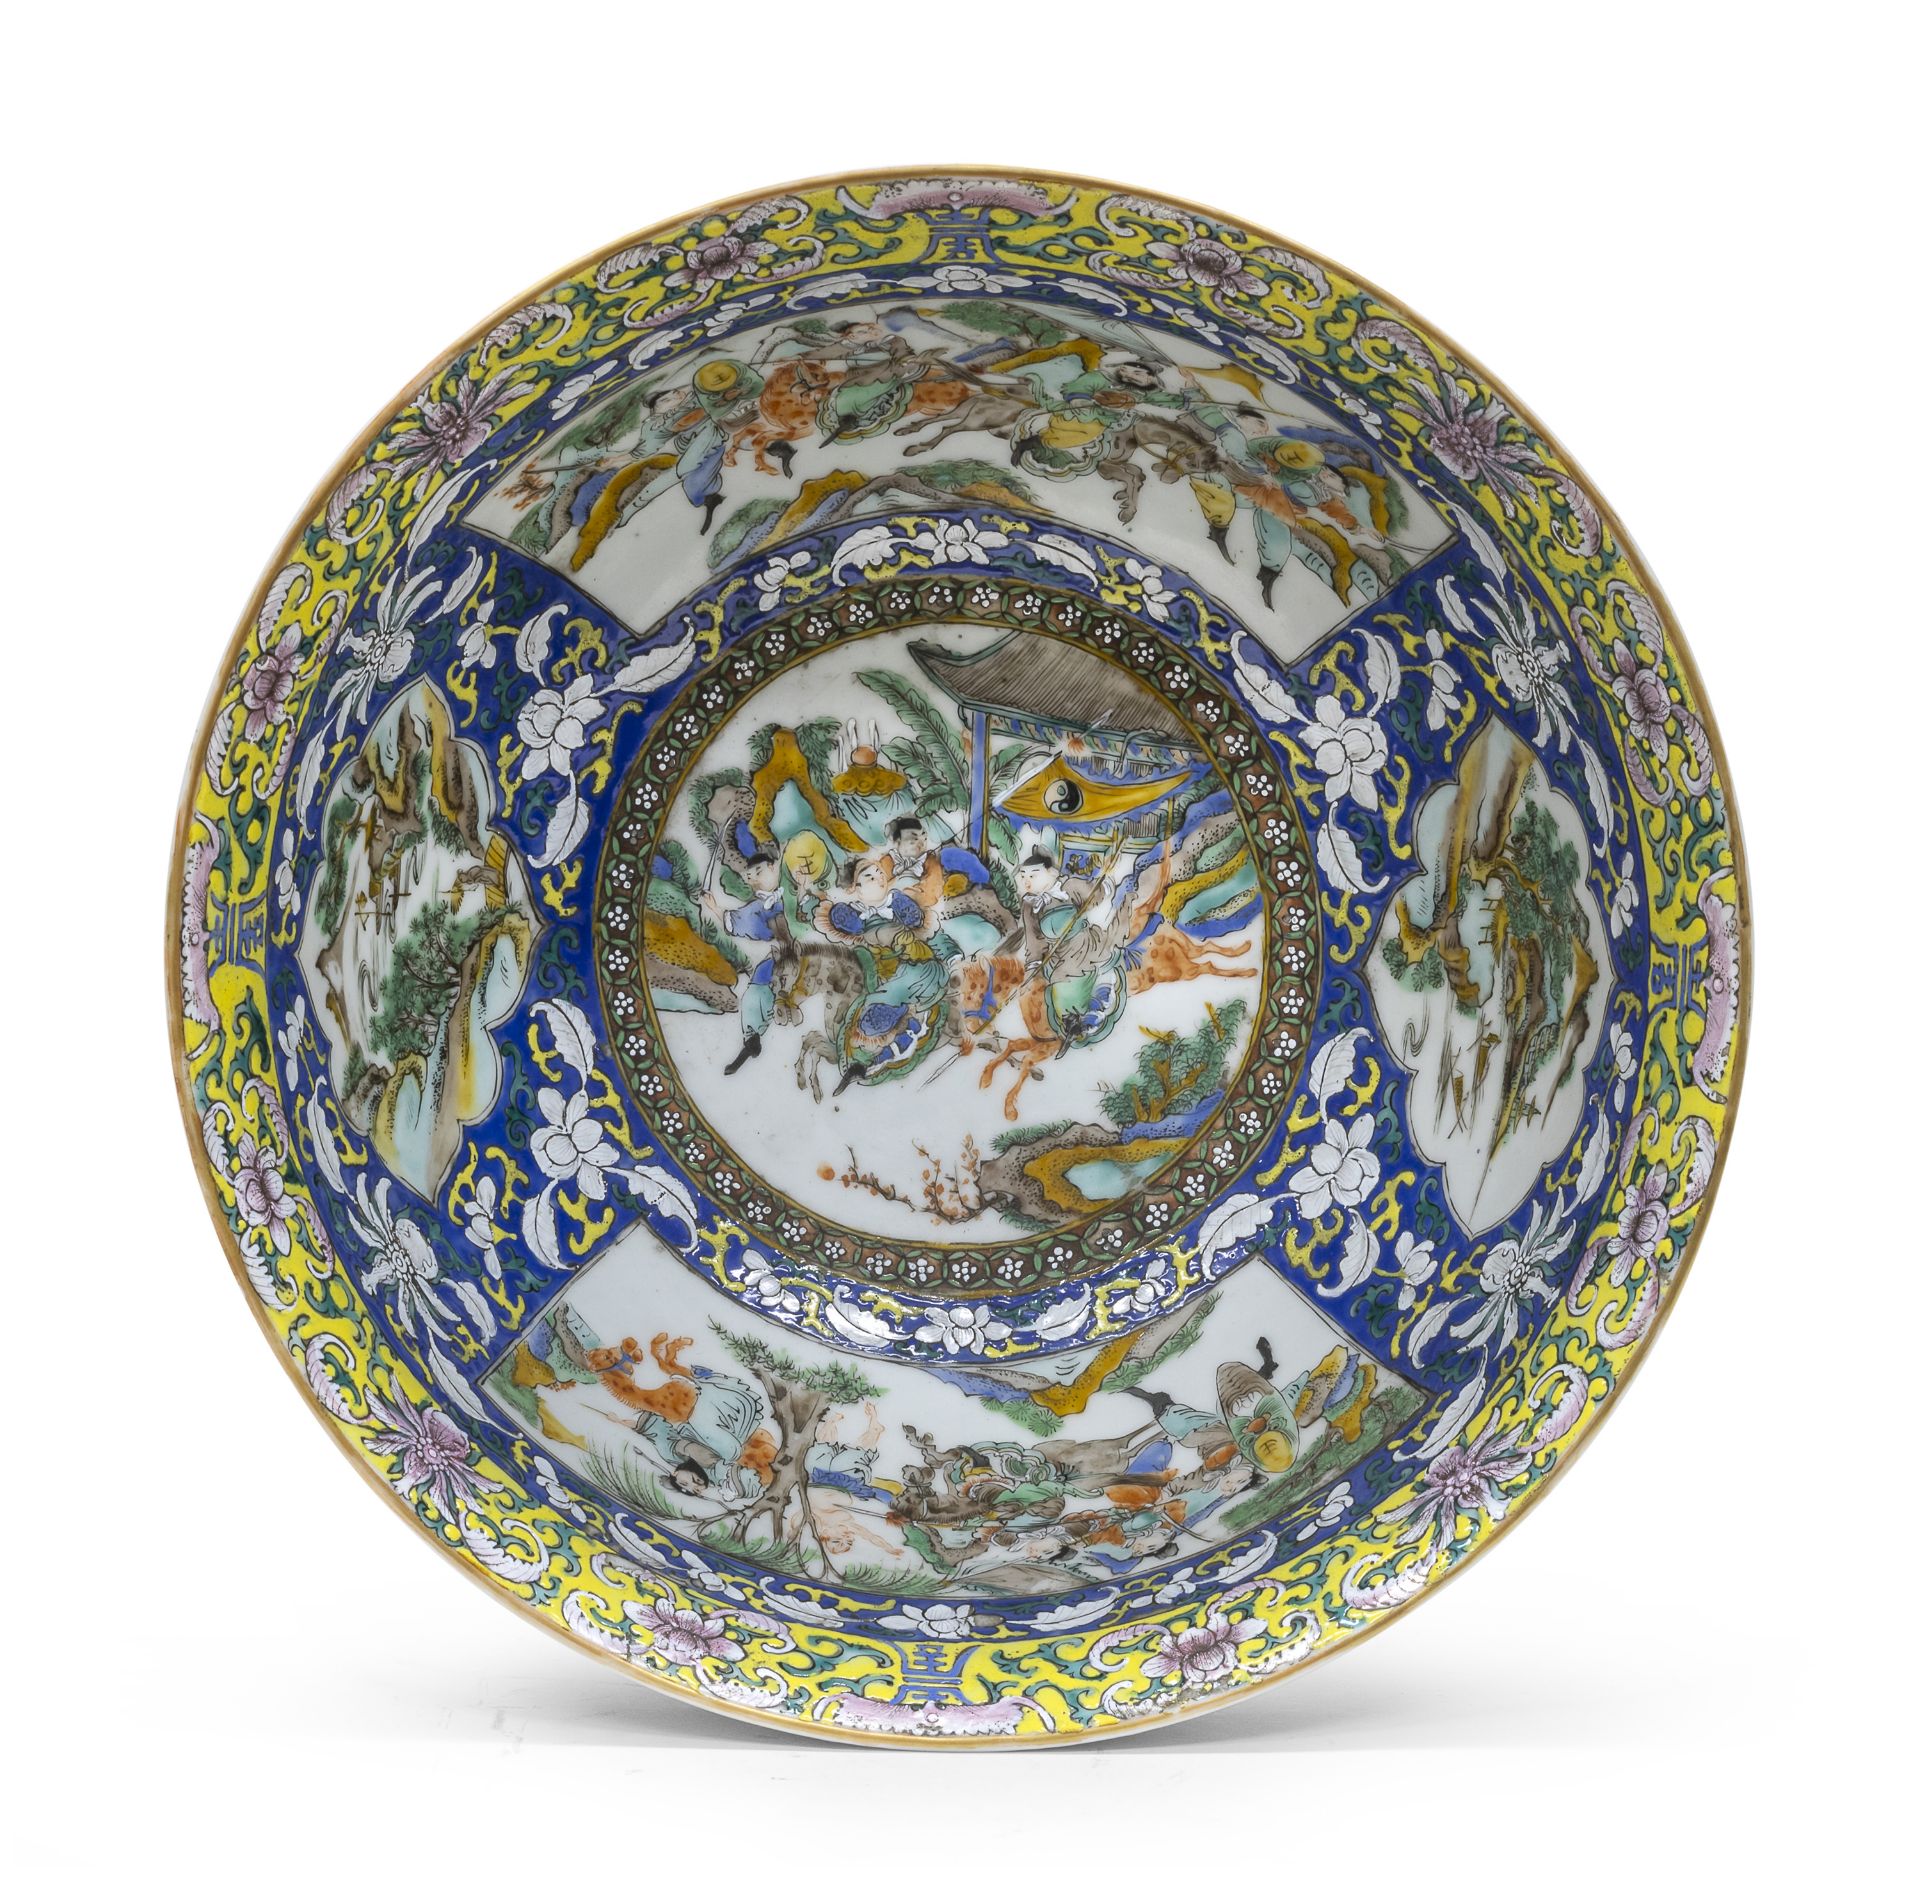 A CHINESE POLYCHROME ENAMELED PORCELAIN BOWL LATE 19TH CENTURY. - Image 2 of 2